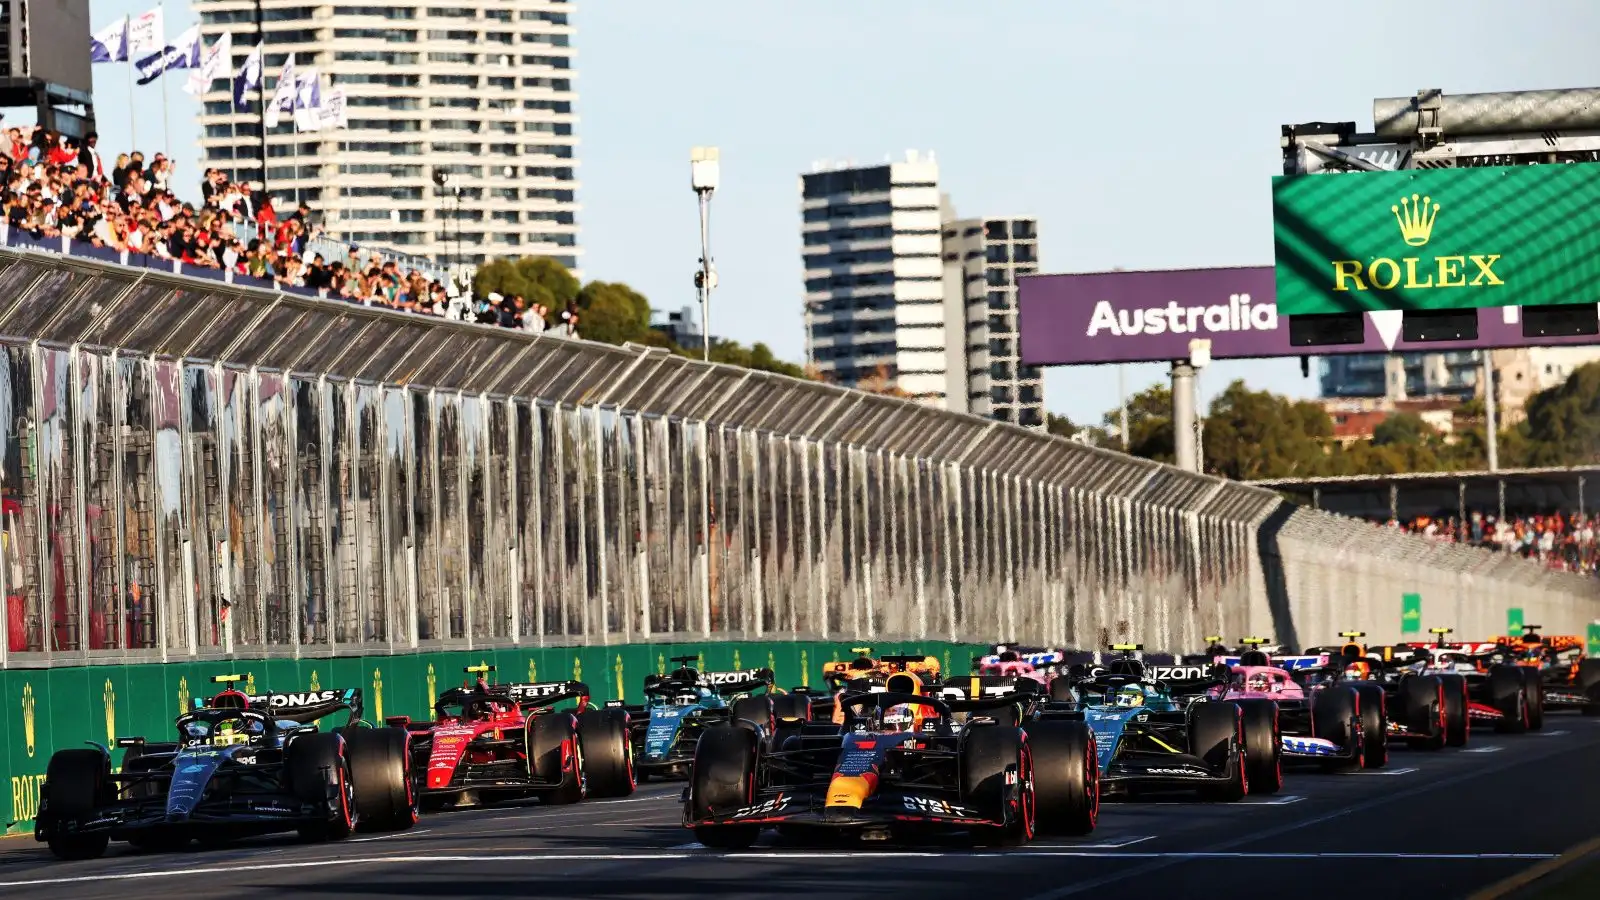 Red Bull driver Max Verstappen leads away at the Australian Grand Prix. F1 Melbourne, April 2023.